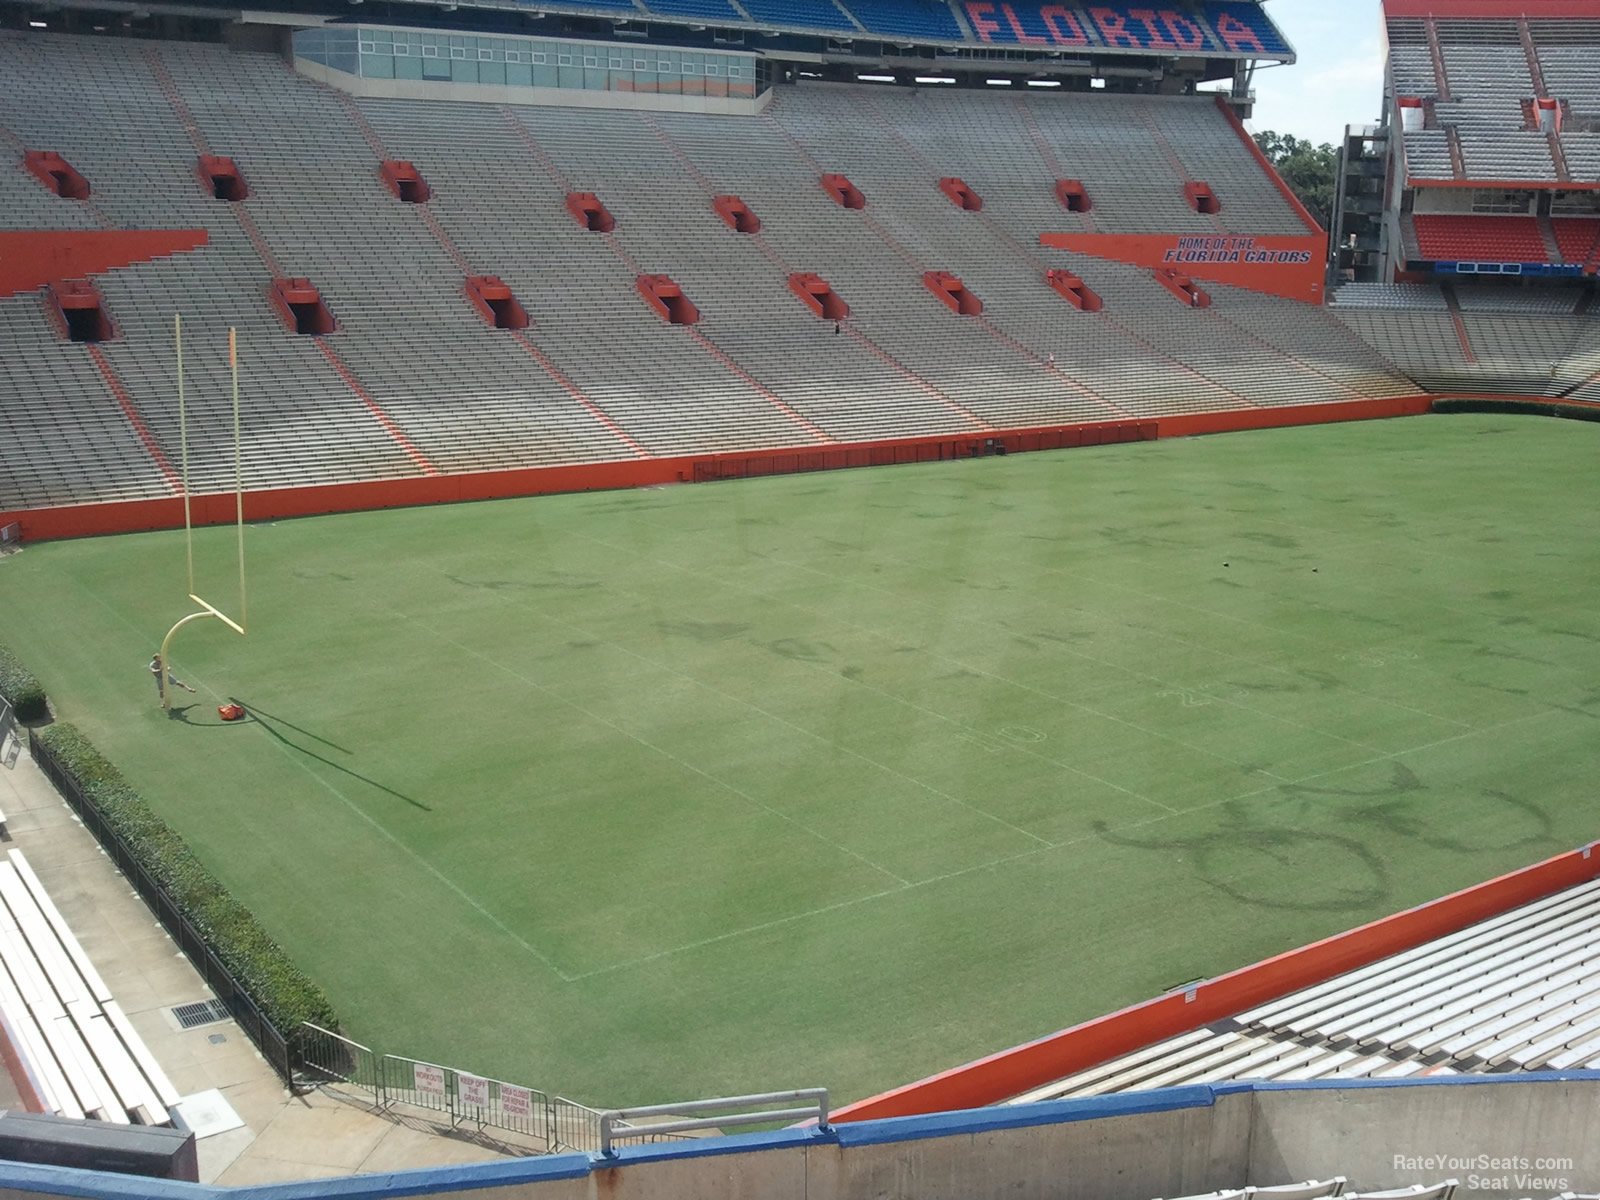 section 47, row 11 seat view  - ben hill griffin stadium